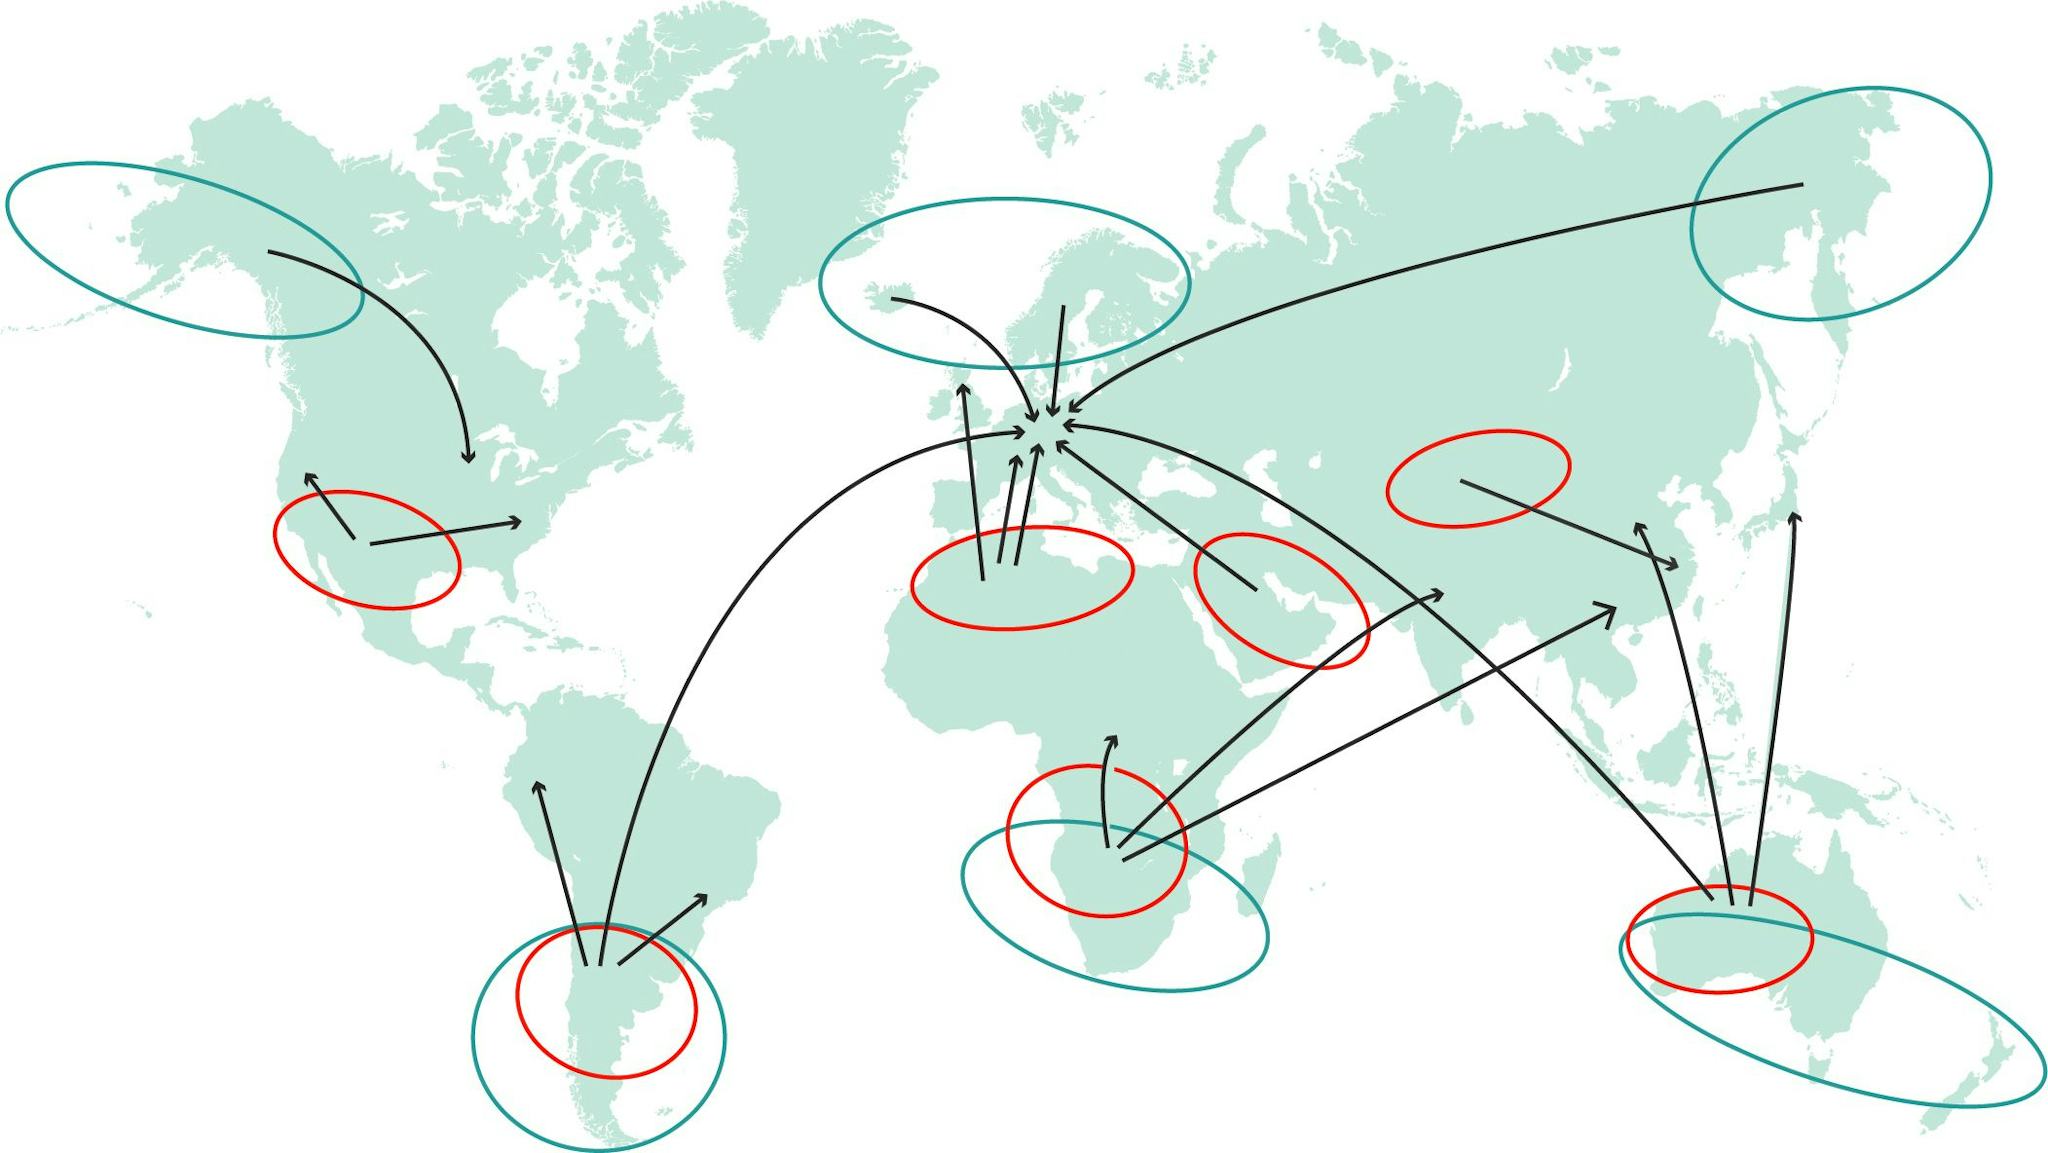 World map with red circles marking specific locations and black arrows indicating connection